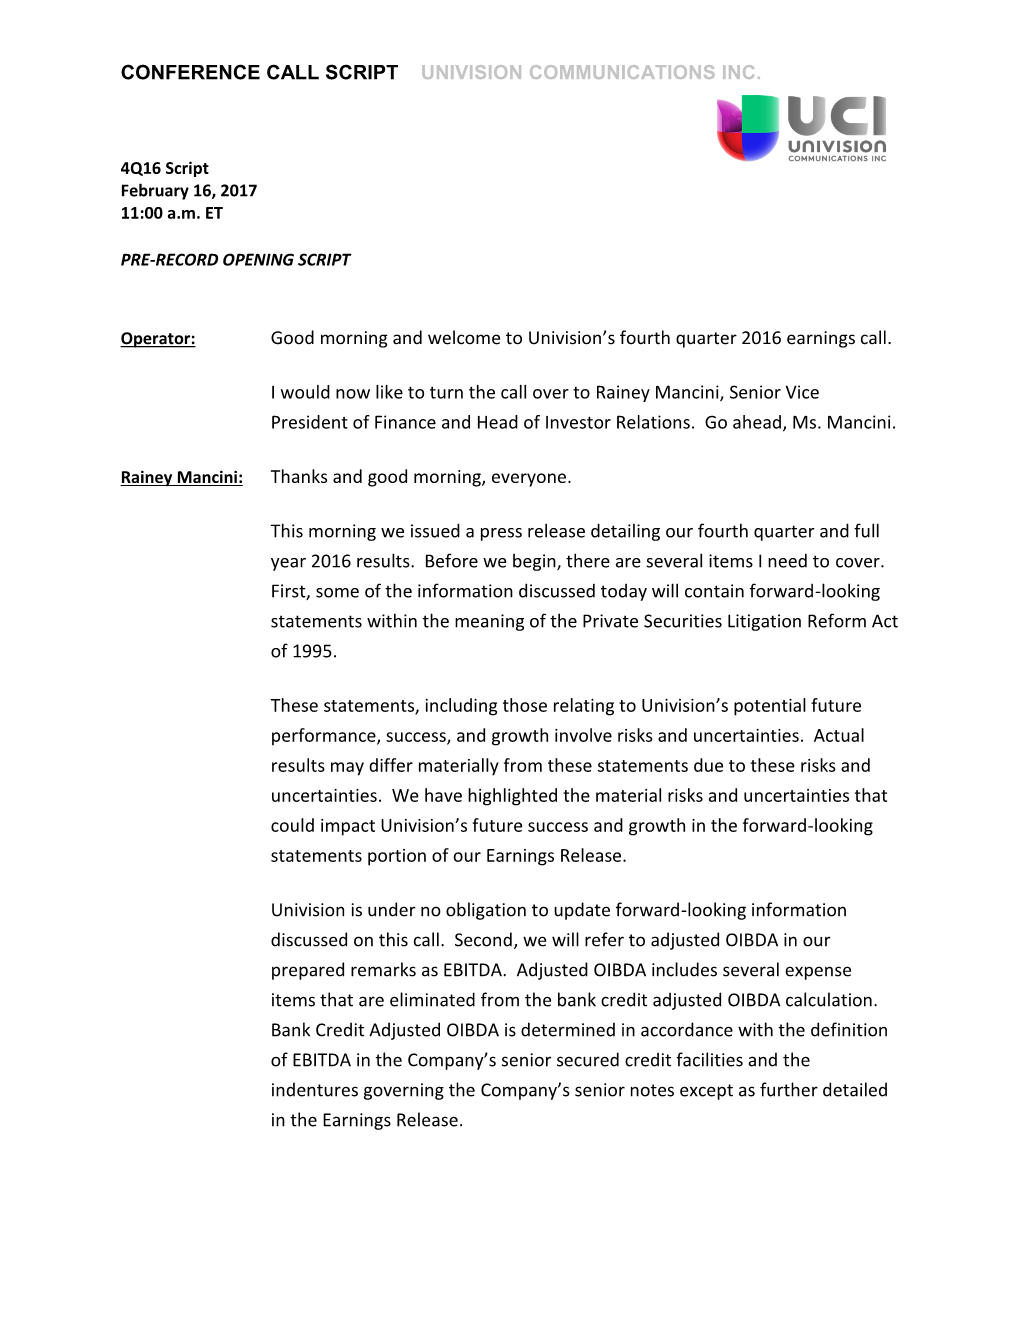 CONFERENCE CALL SCRIPT UNIVISION COMMUNICATIONS INC. Good Morning and Welcome to Univision's Fourth Quarter 2016 Earnings Call